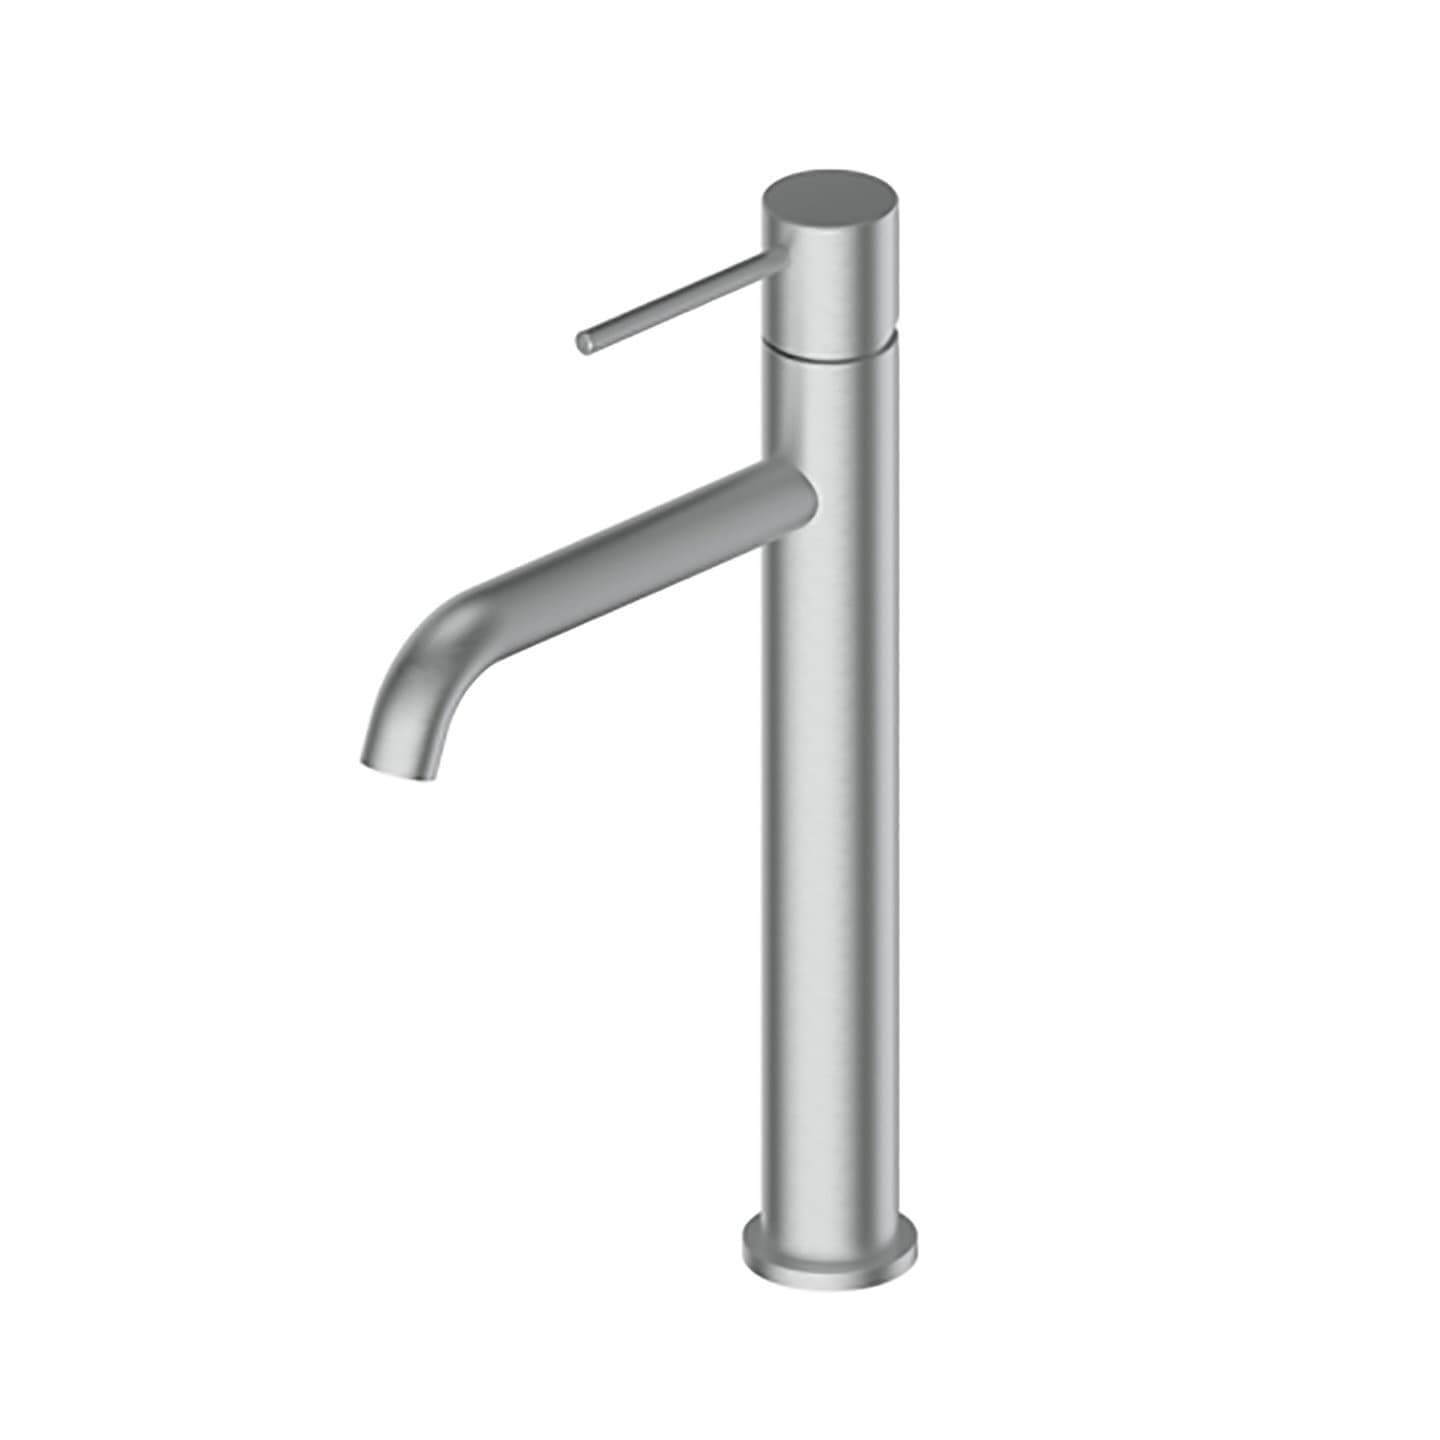 GREENS GISELLE TOWER BASIN MIXER